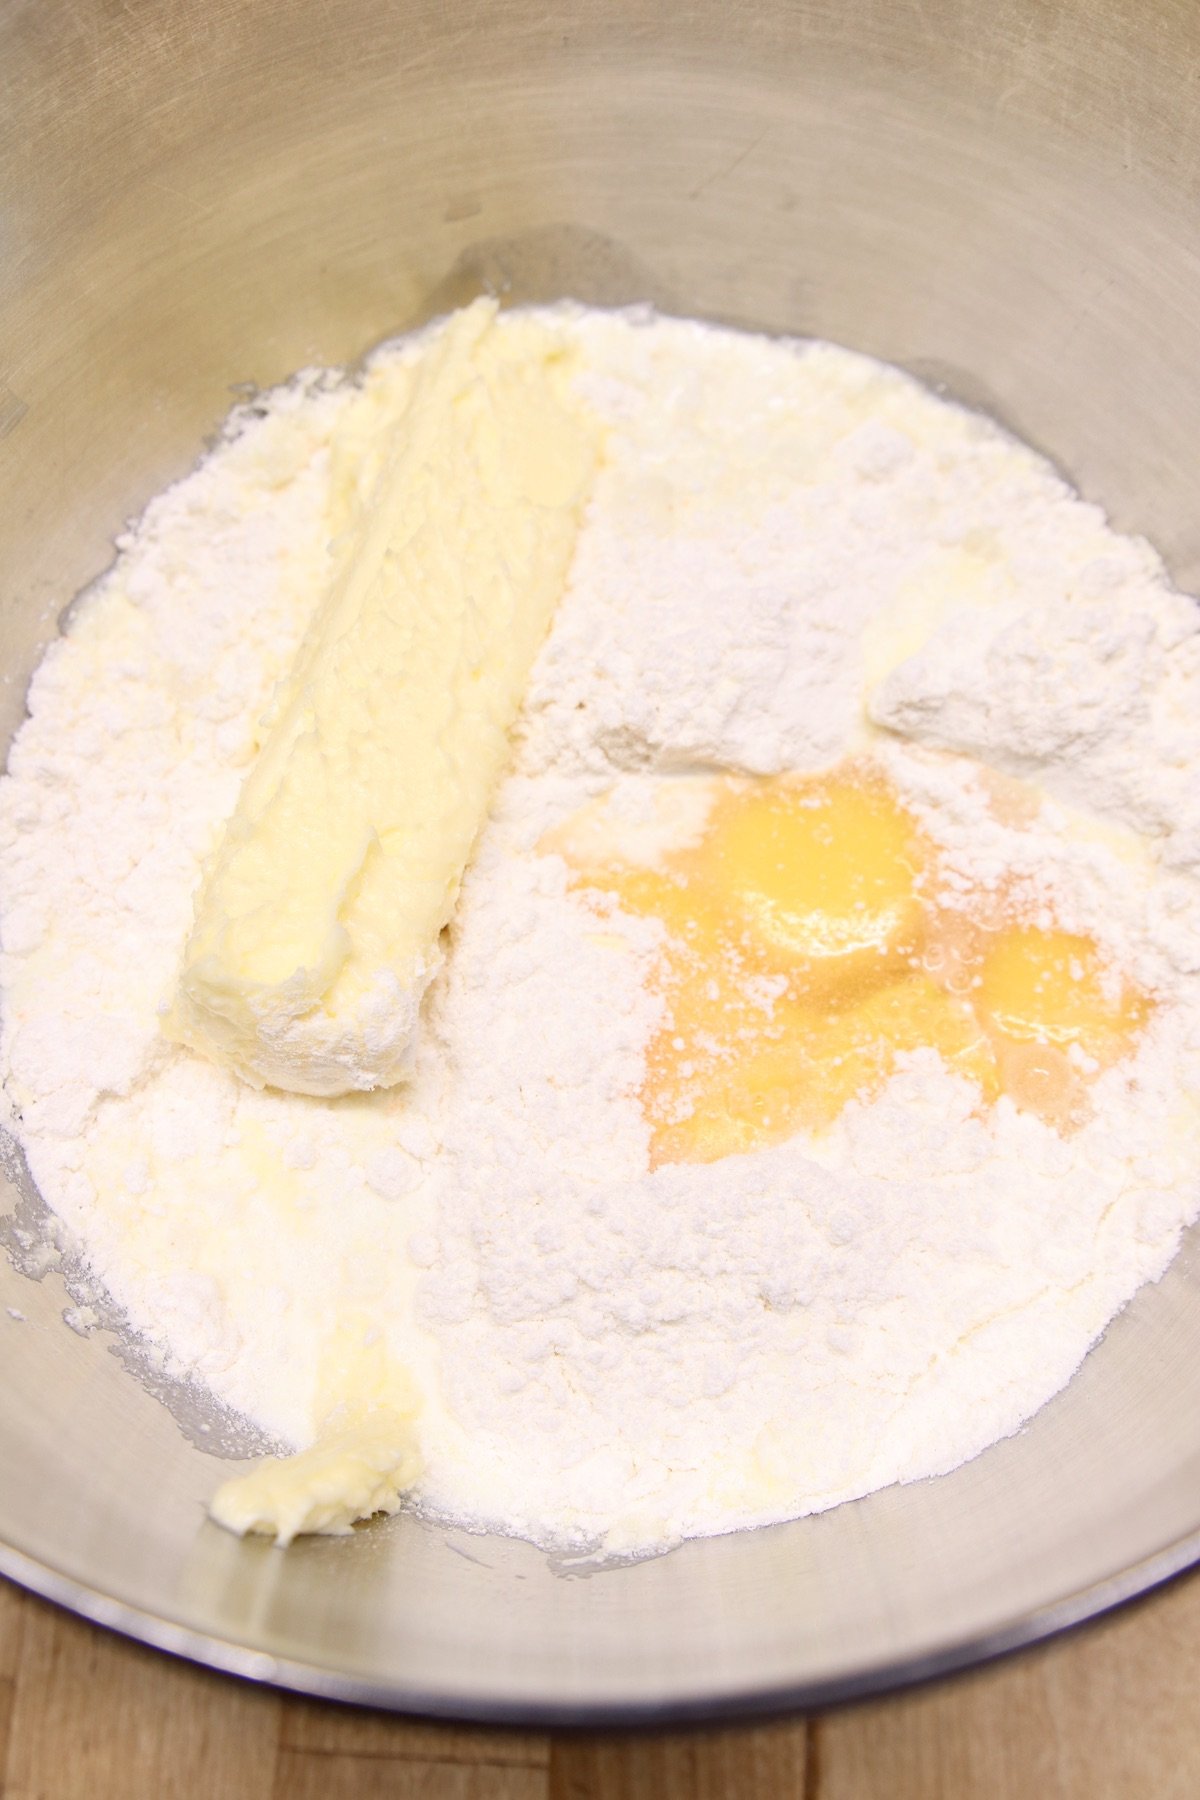 cake mix, butter, eggs and milk in a mixer bowl